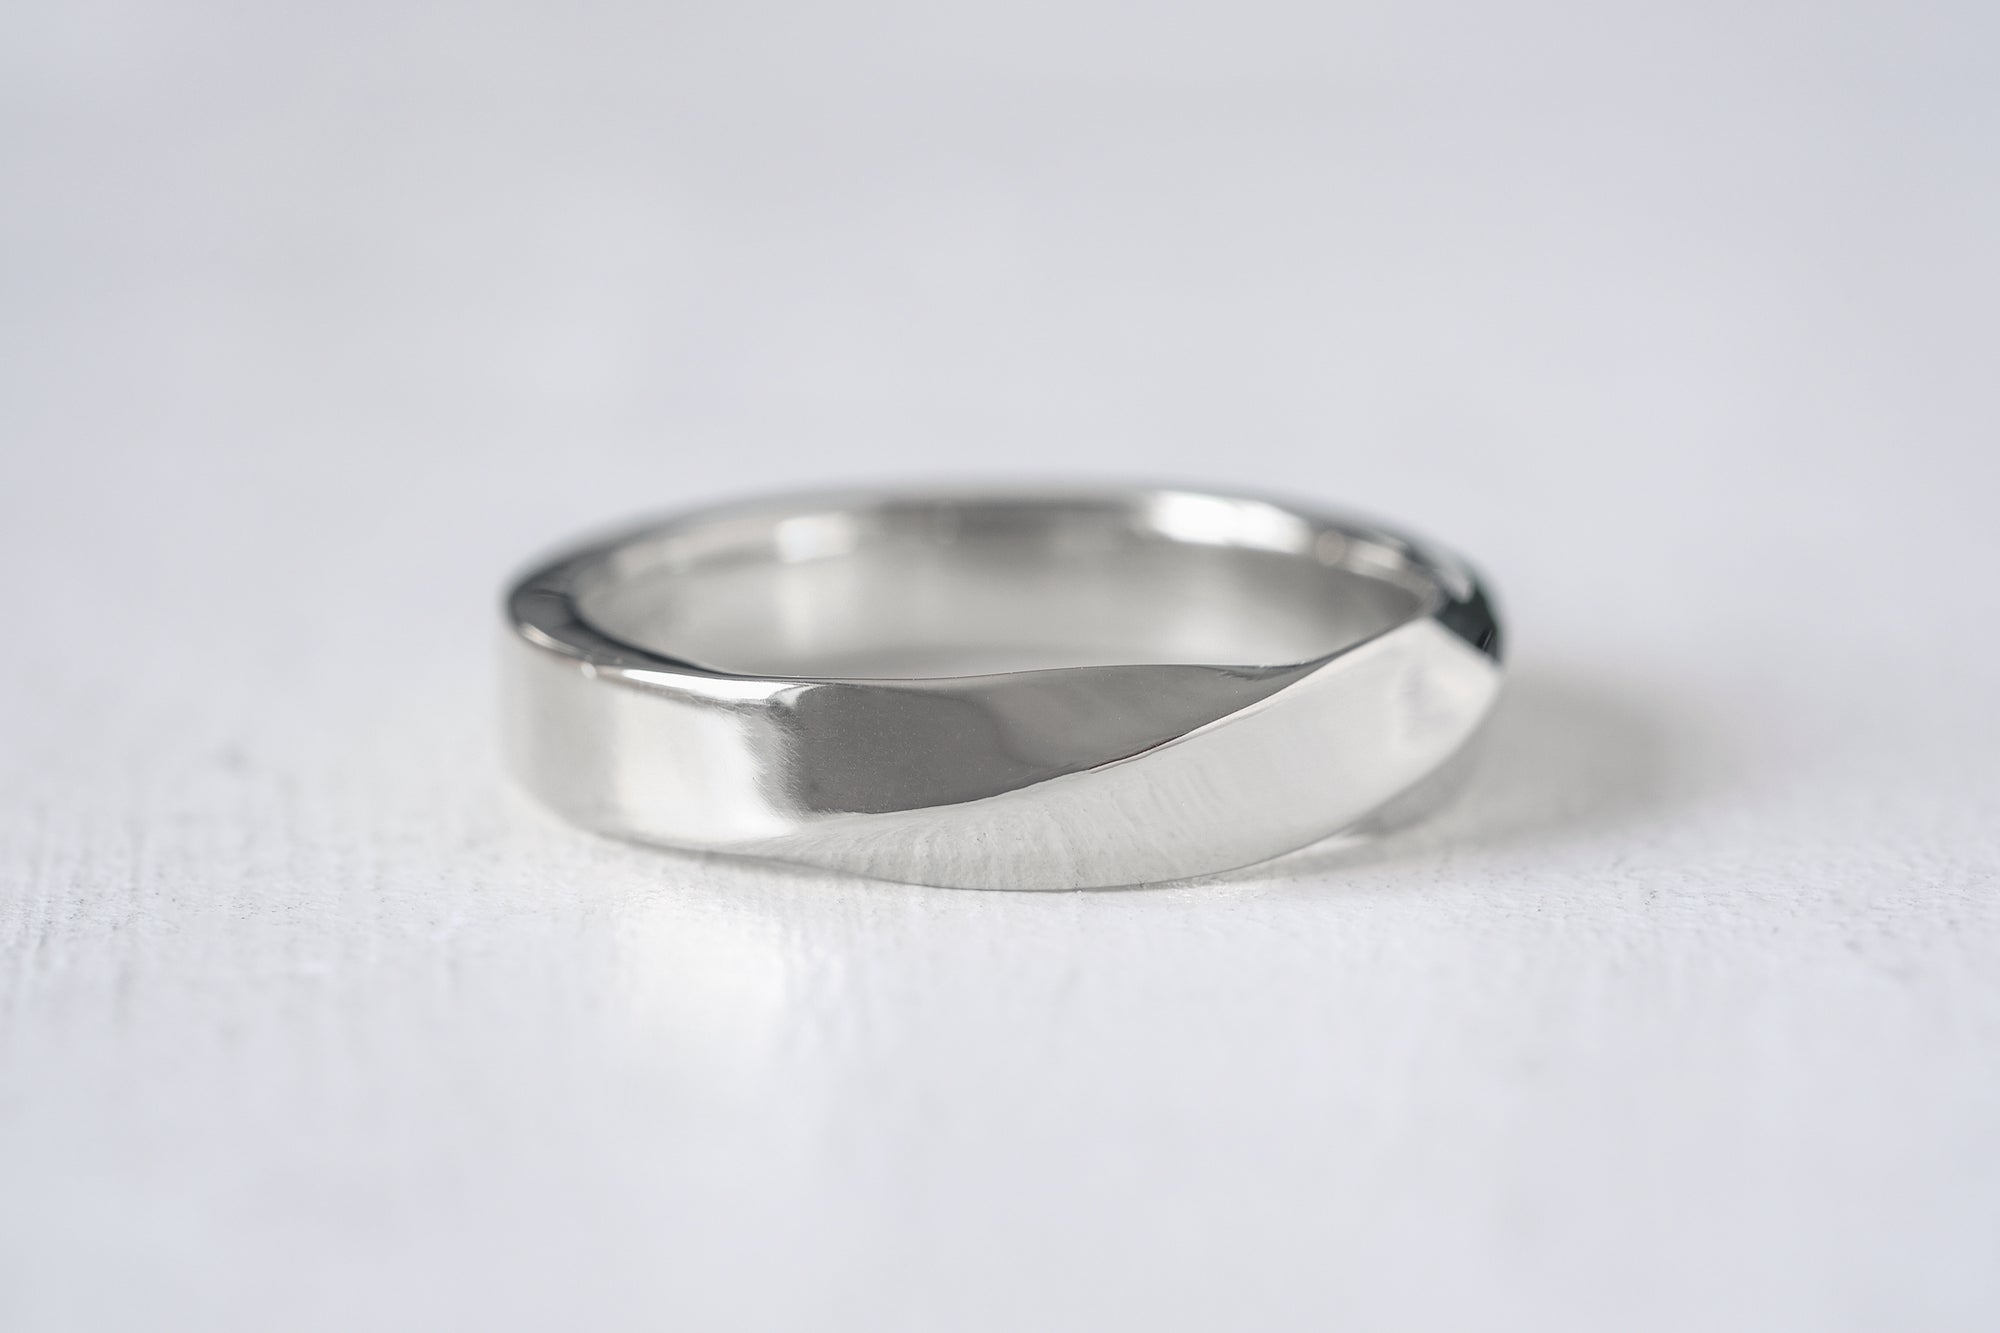 Mobius Gold Wedding Ring 4mm With A Shiny Finish